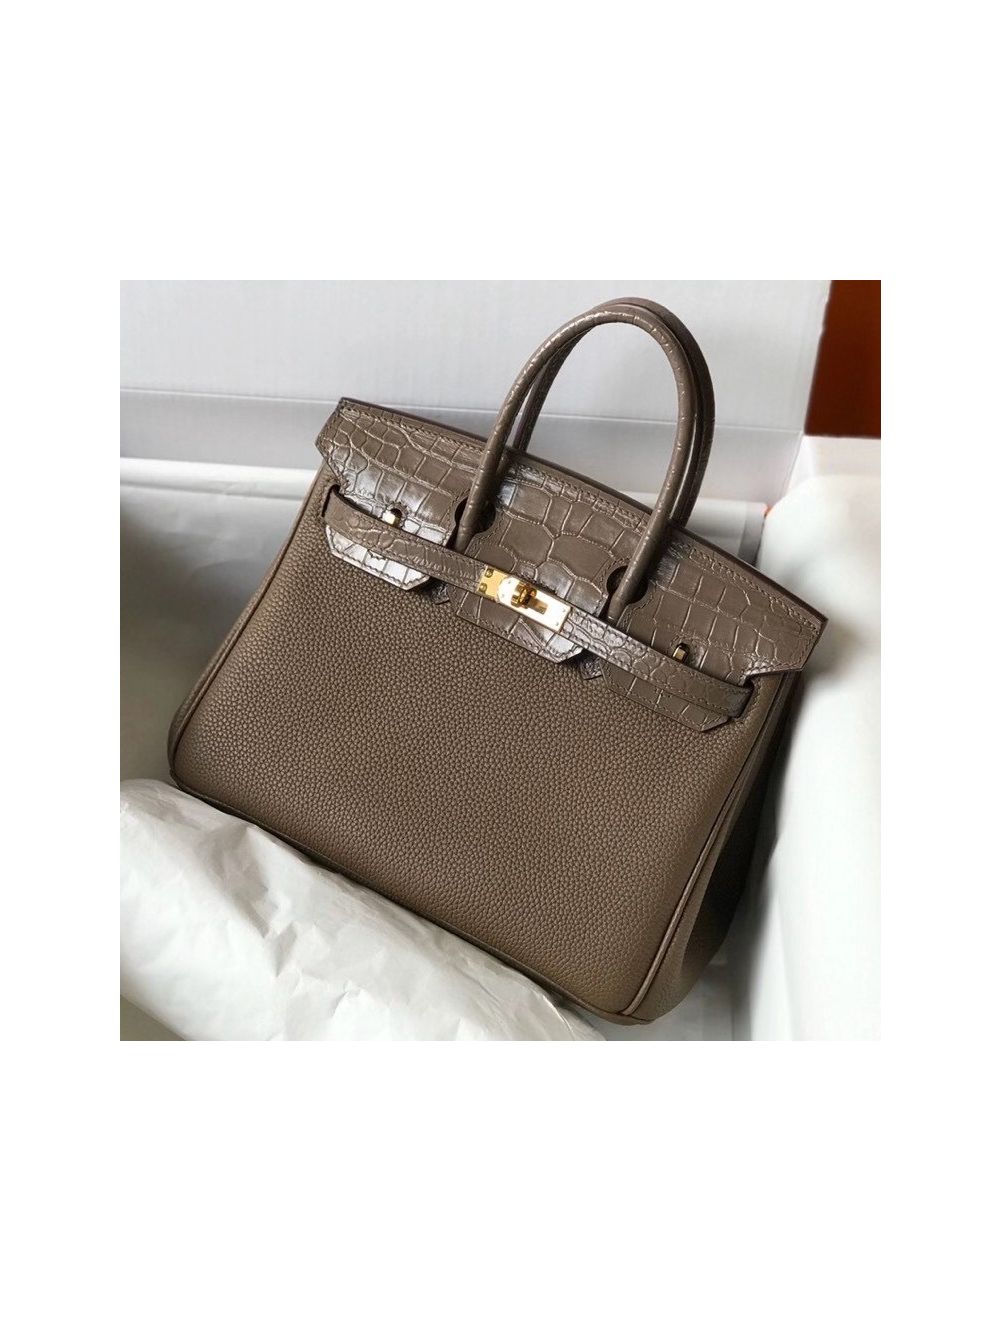 Kelly depeches 36 touch briefcase